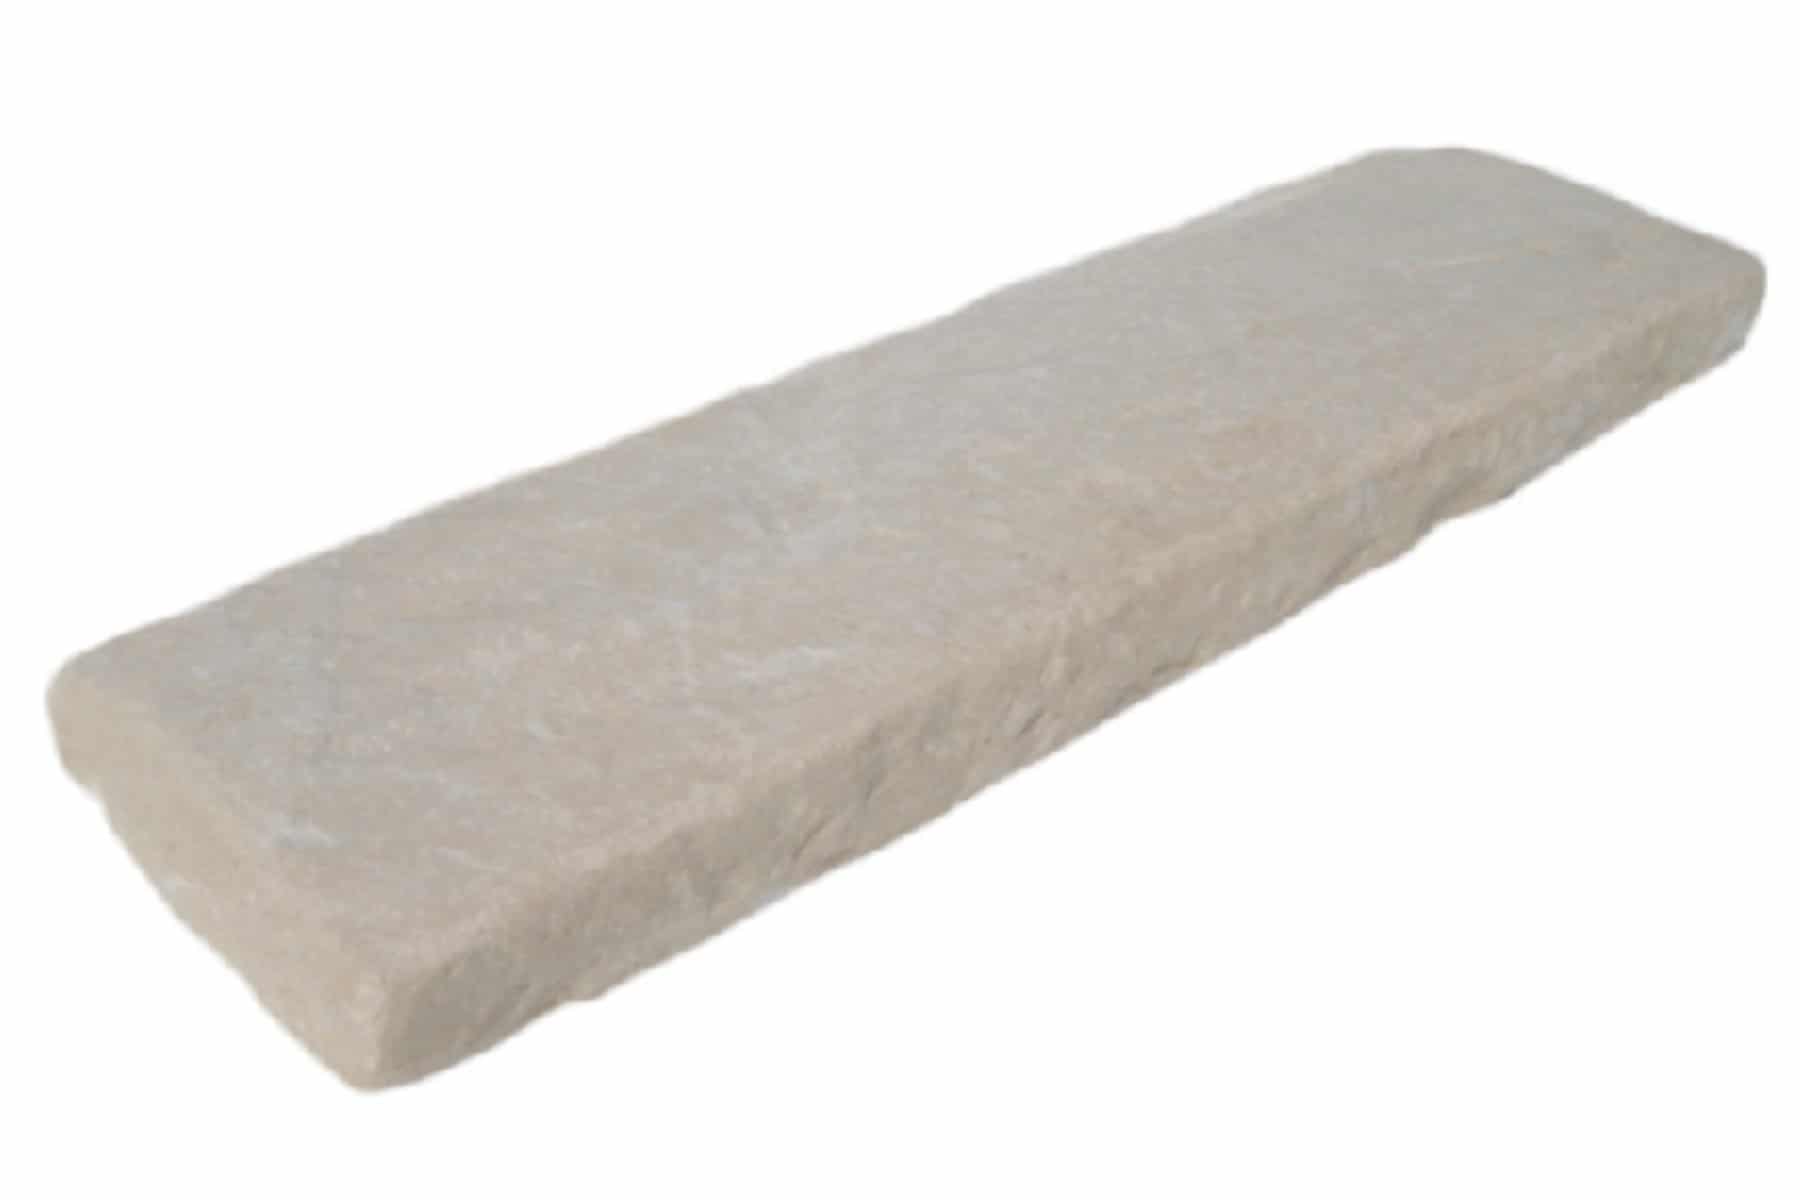 Mint Coping Stone